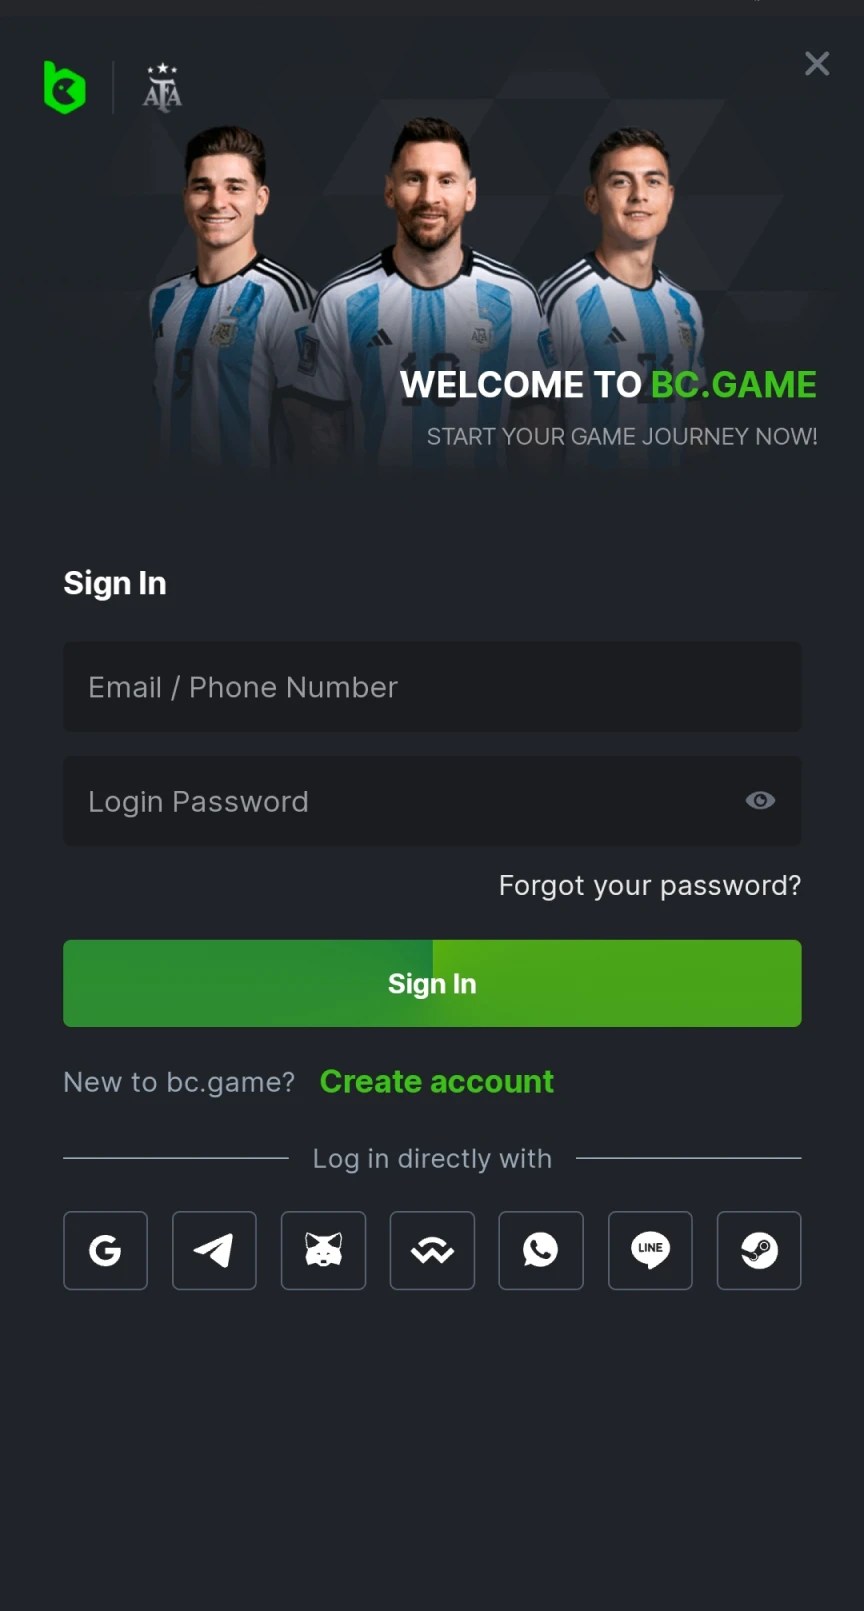 Install and log into your personal account with the BCGame iOS app.